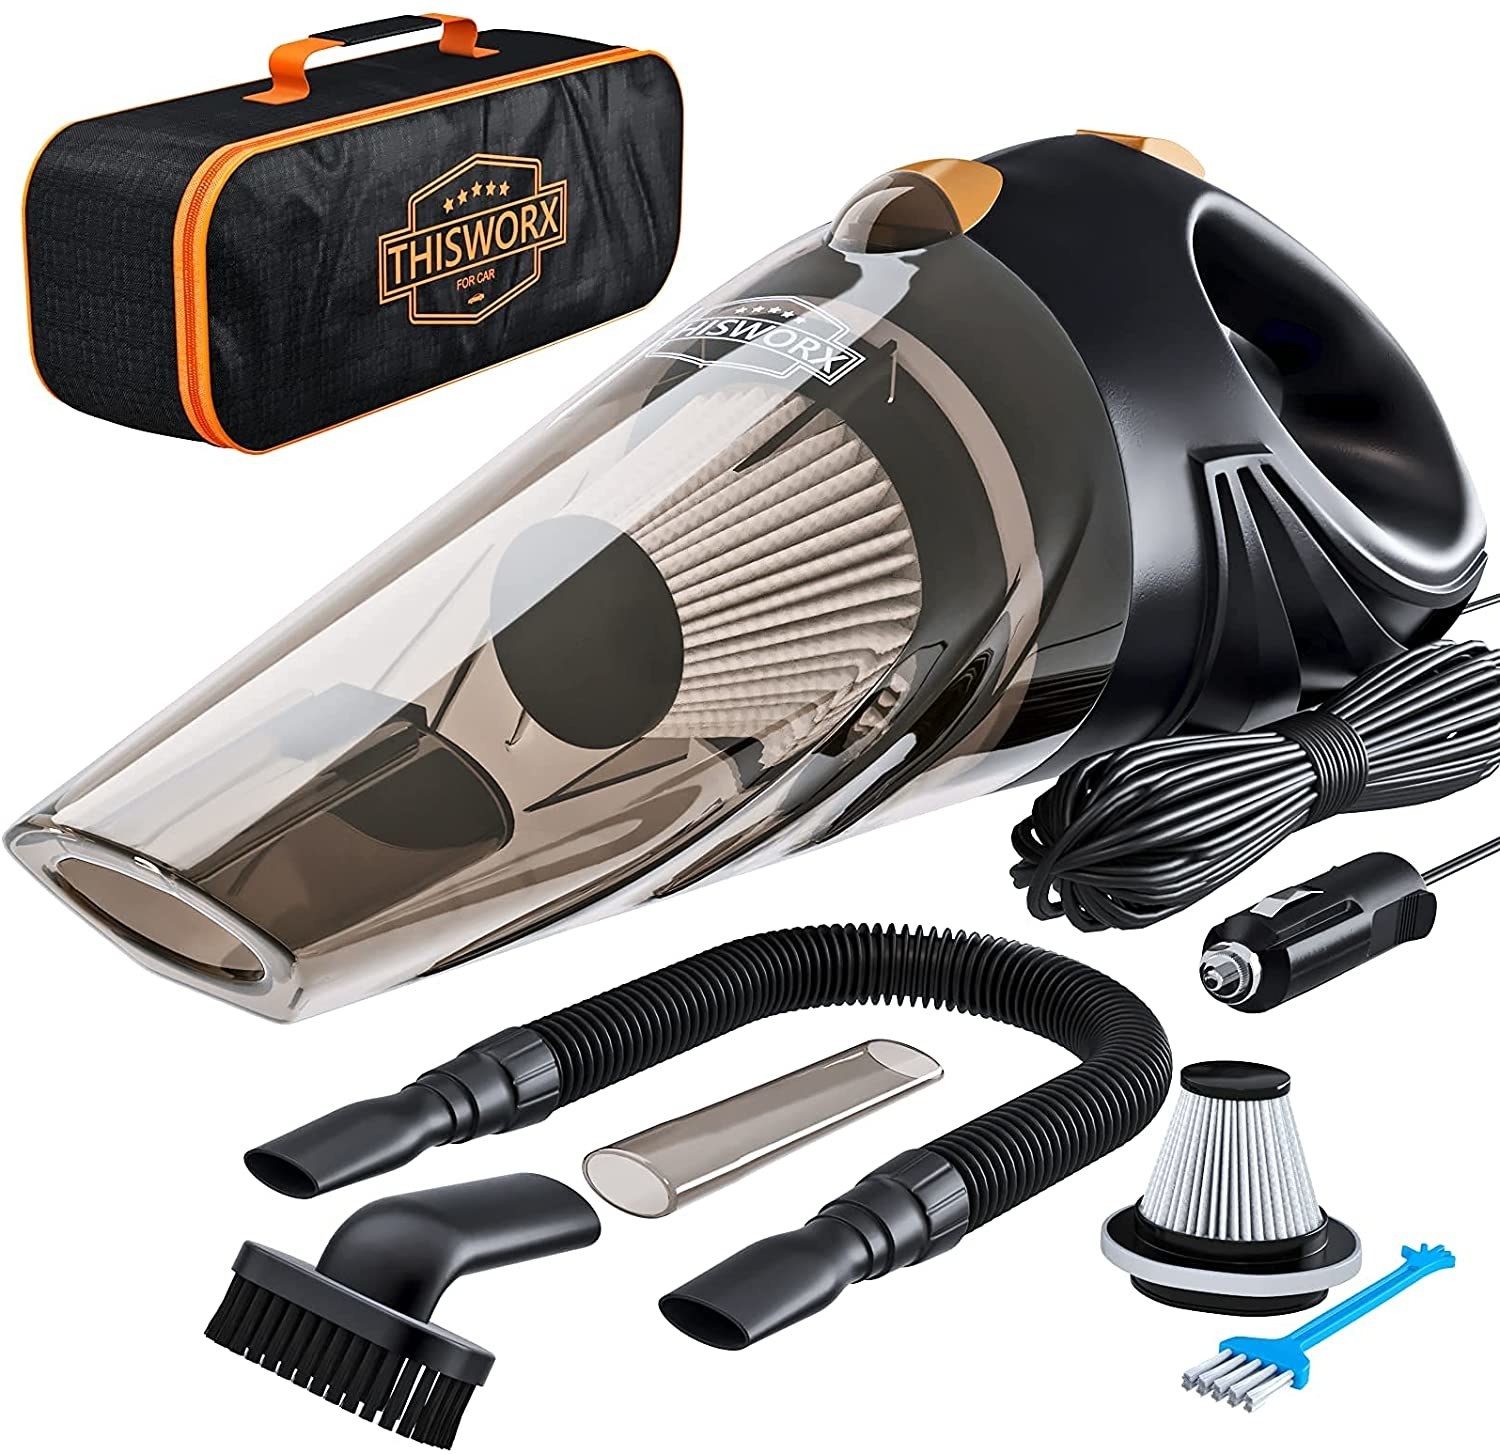 The handheld vac with extension cord and attachments